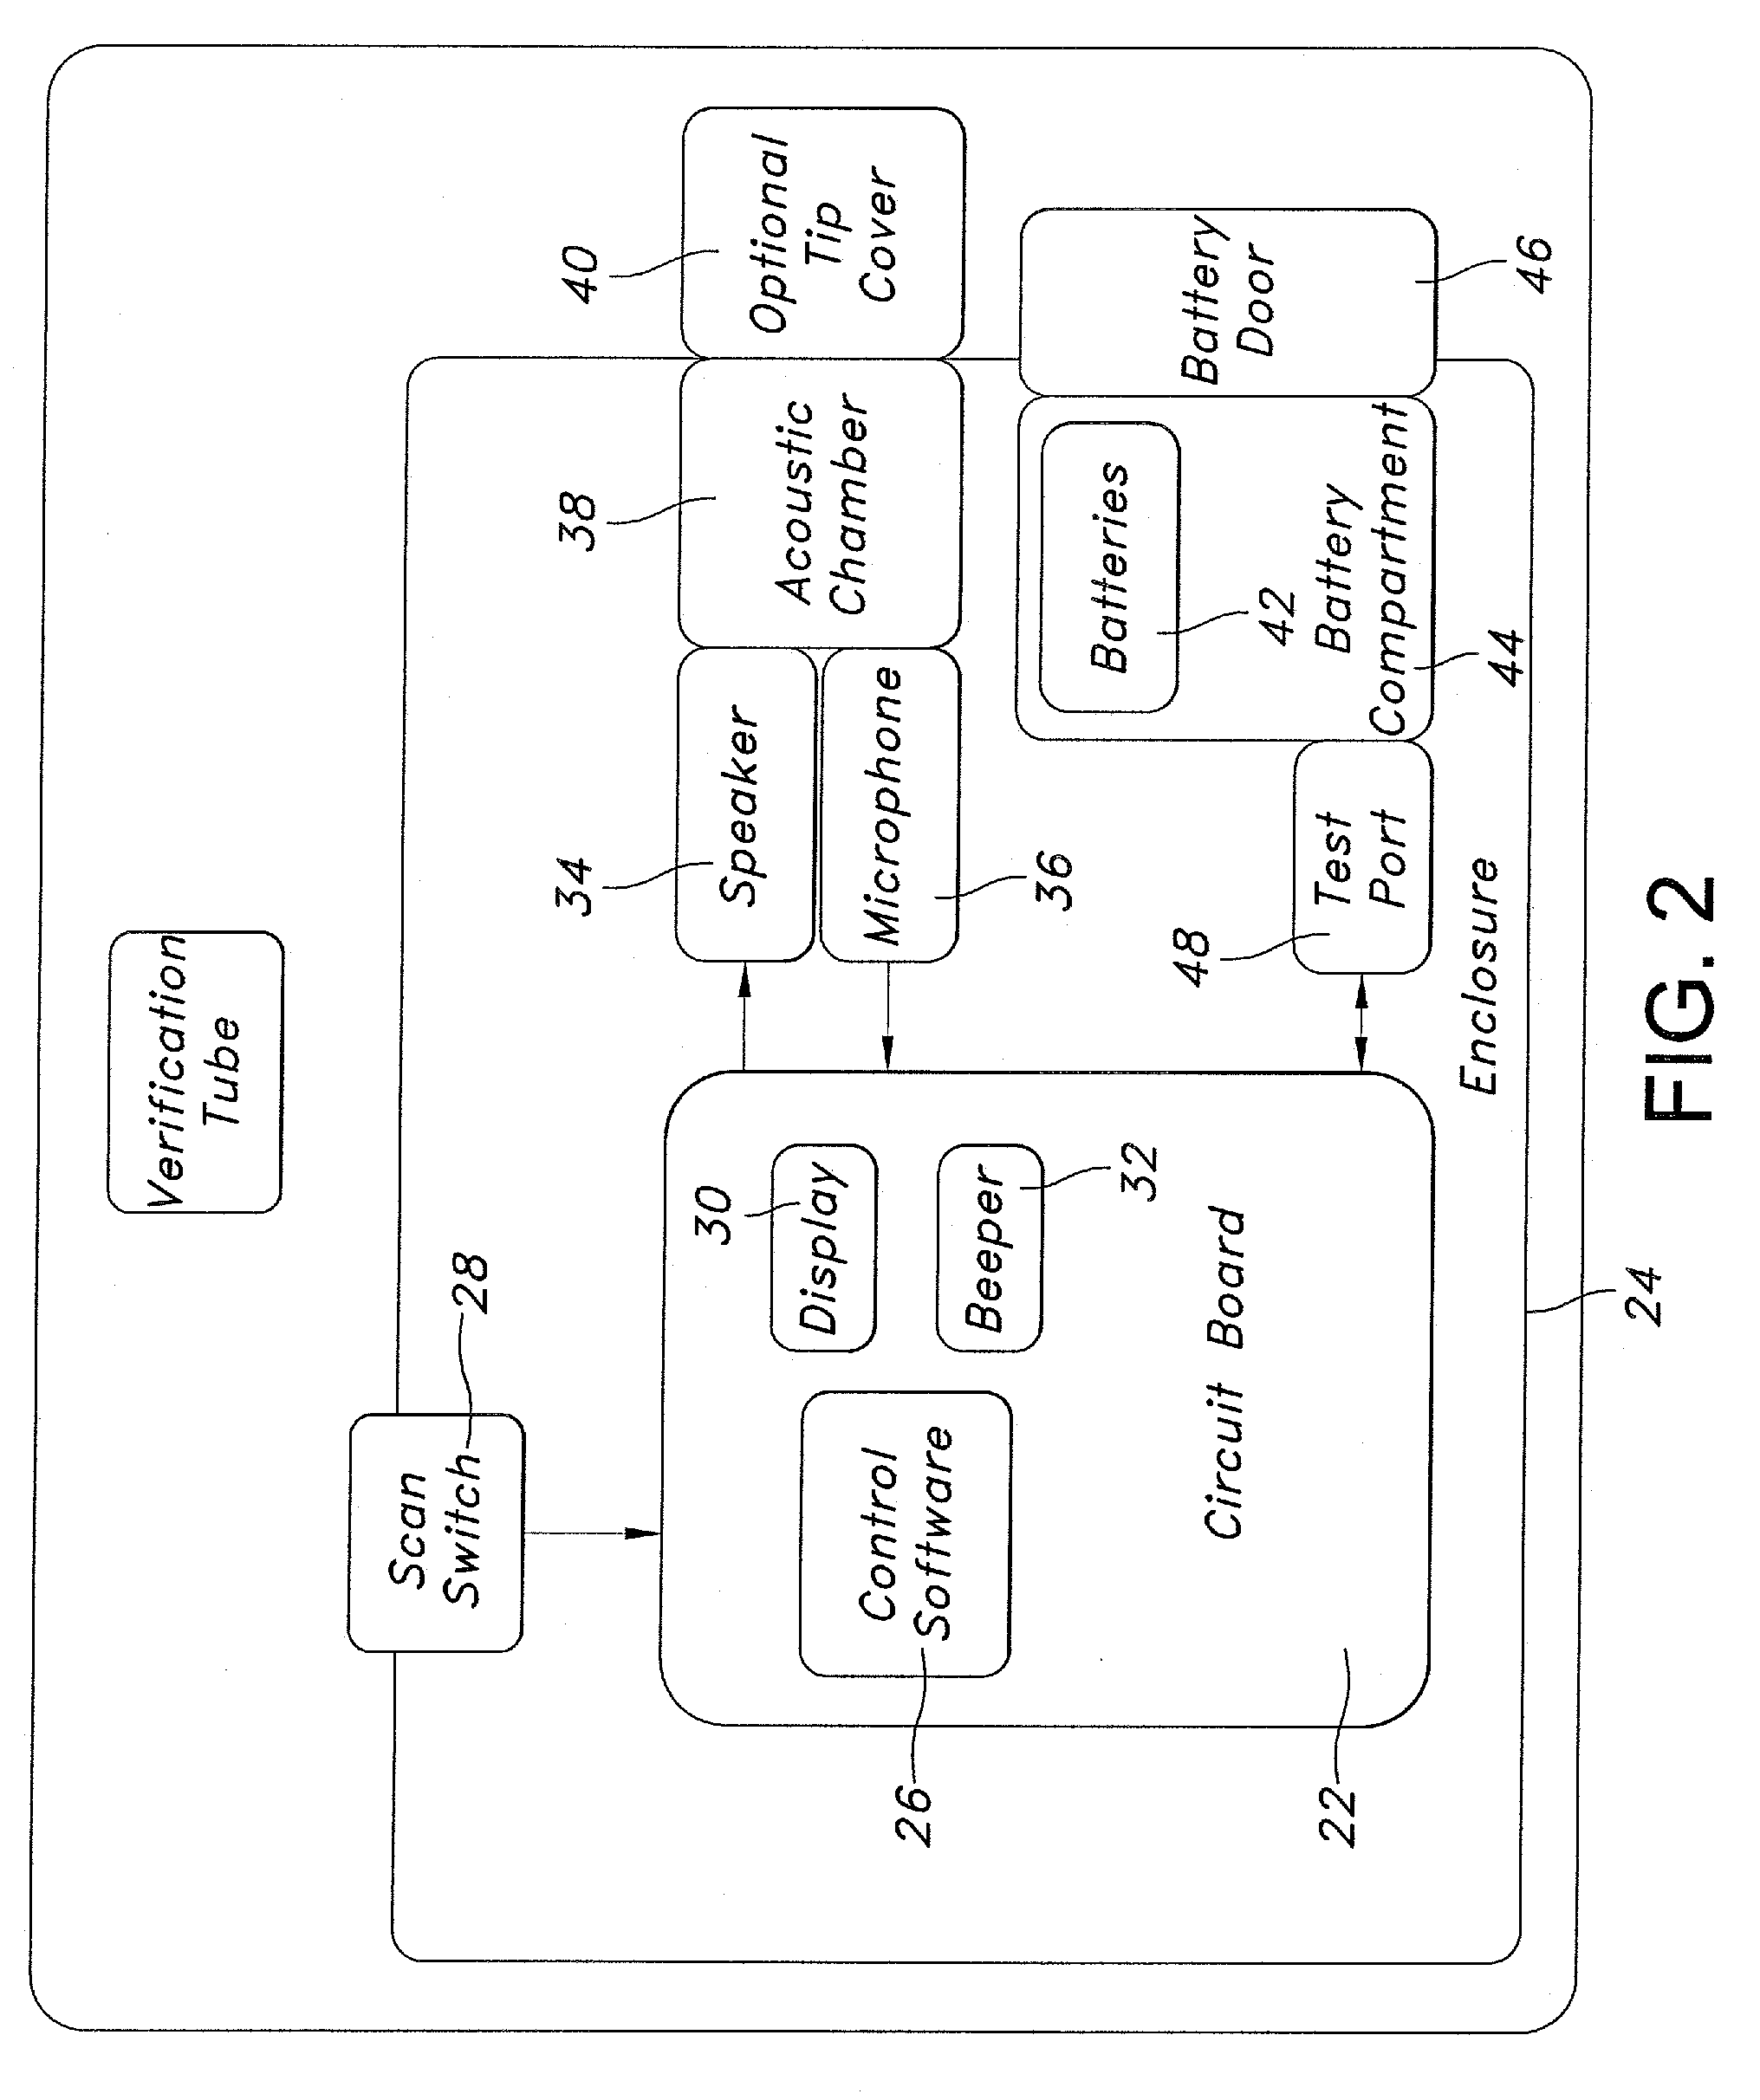 Acoustic reflectometry instrument and method